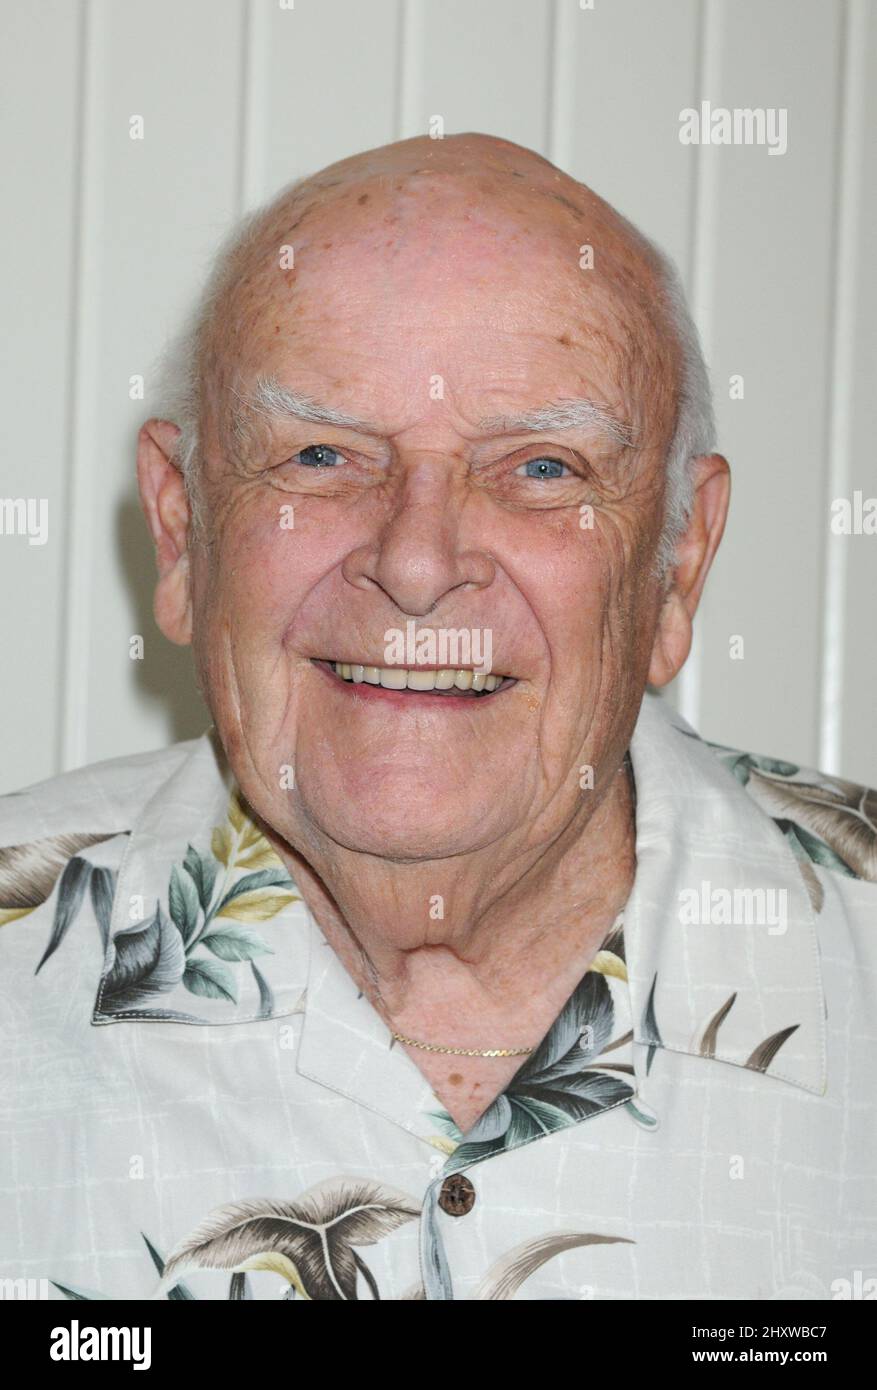 John Ingle at the 'General Hospital' fan club luncheon held at the Sportsmens Lodge in Studio City California Stock Photo